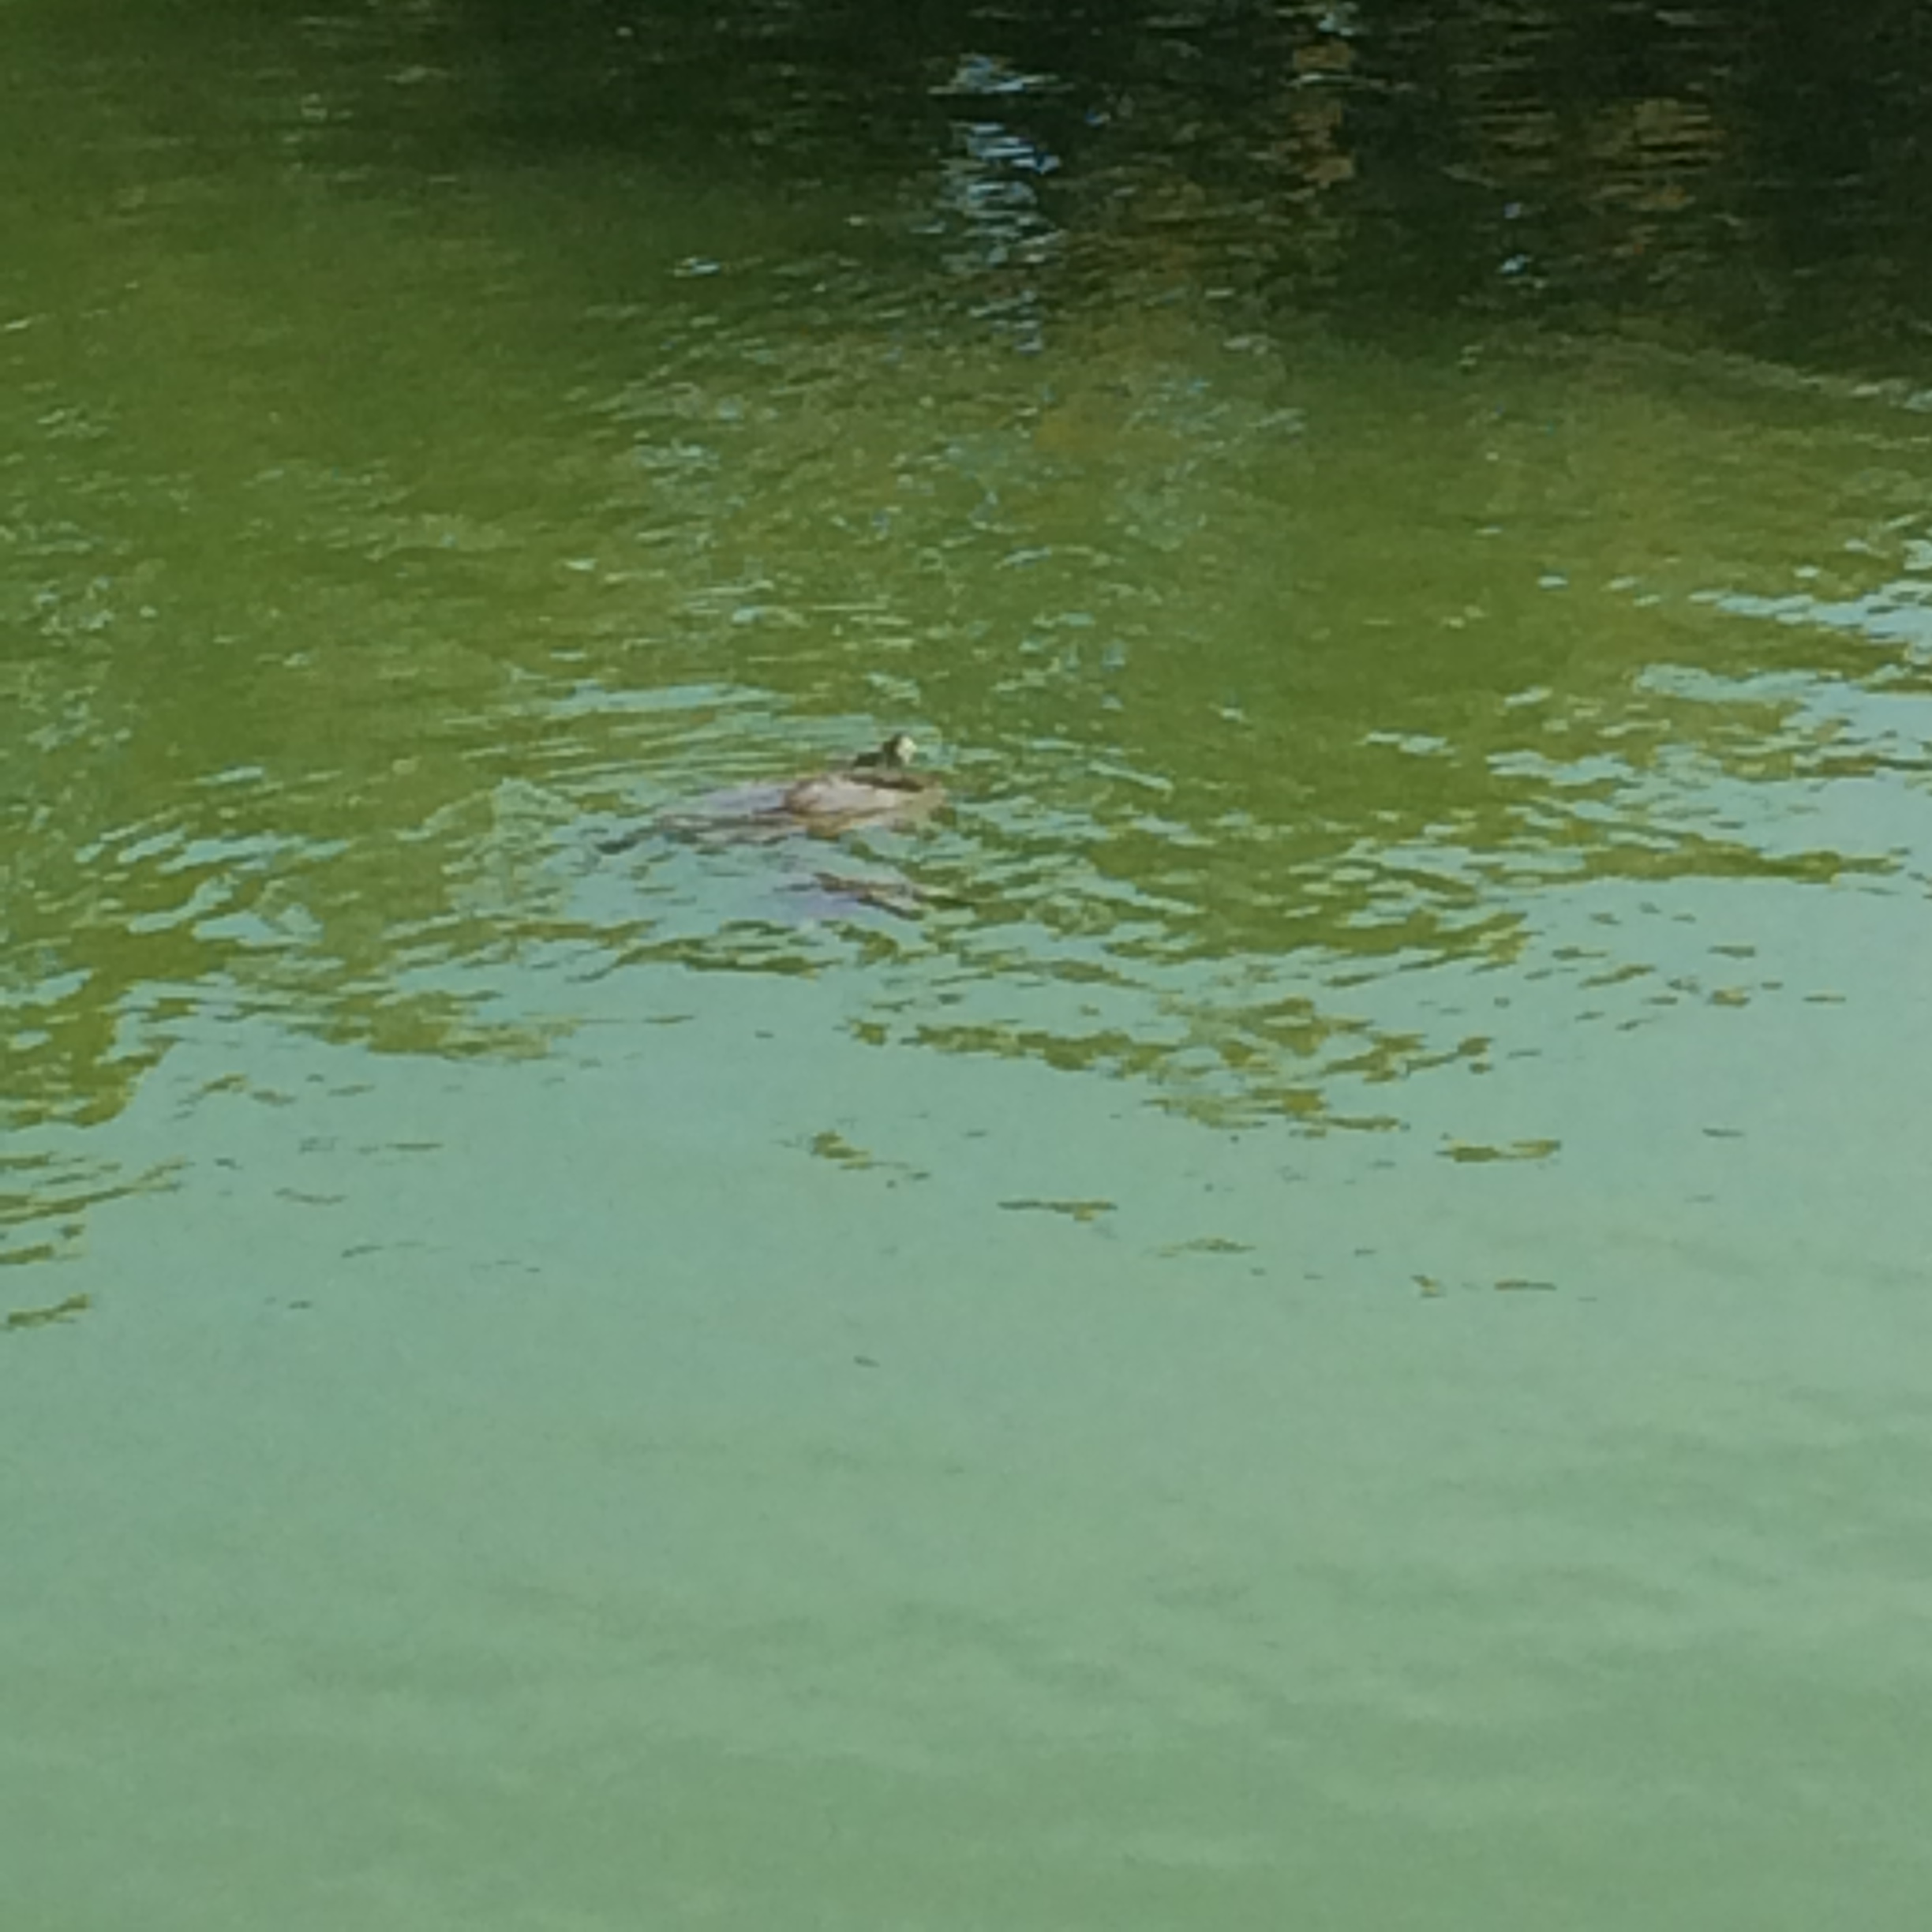 You probably can't tell but this is a picture of a turtle. I took several pictures but really this is the best I've got. They wouldn't keep their heads up long enough for me to get a good picture.